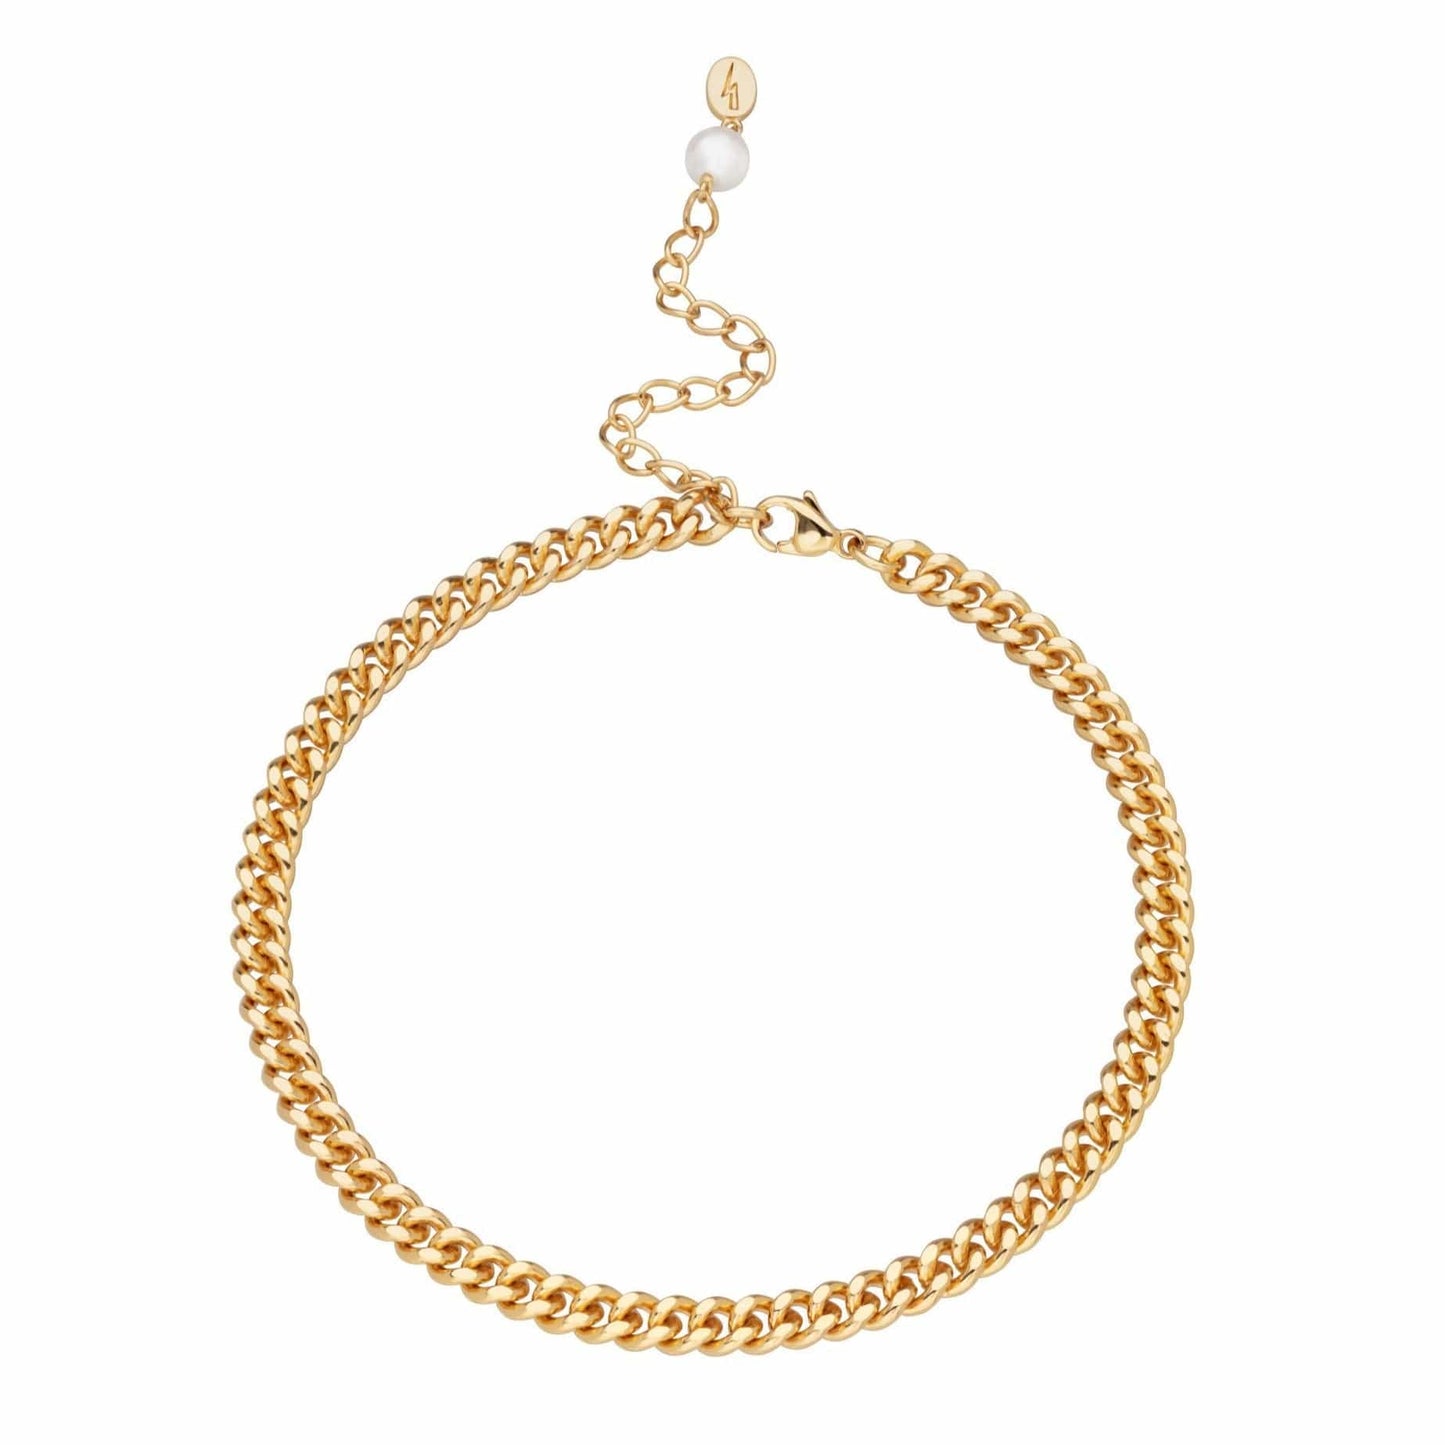 ANK-GPL Hannah Martin Curb Chain Anklet - 18k Gold Plated